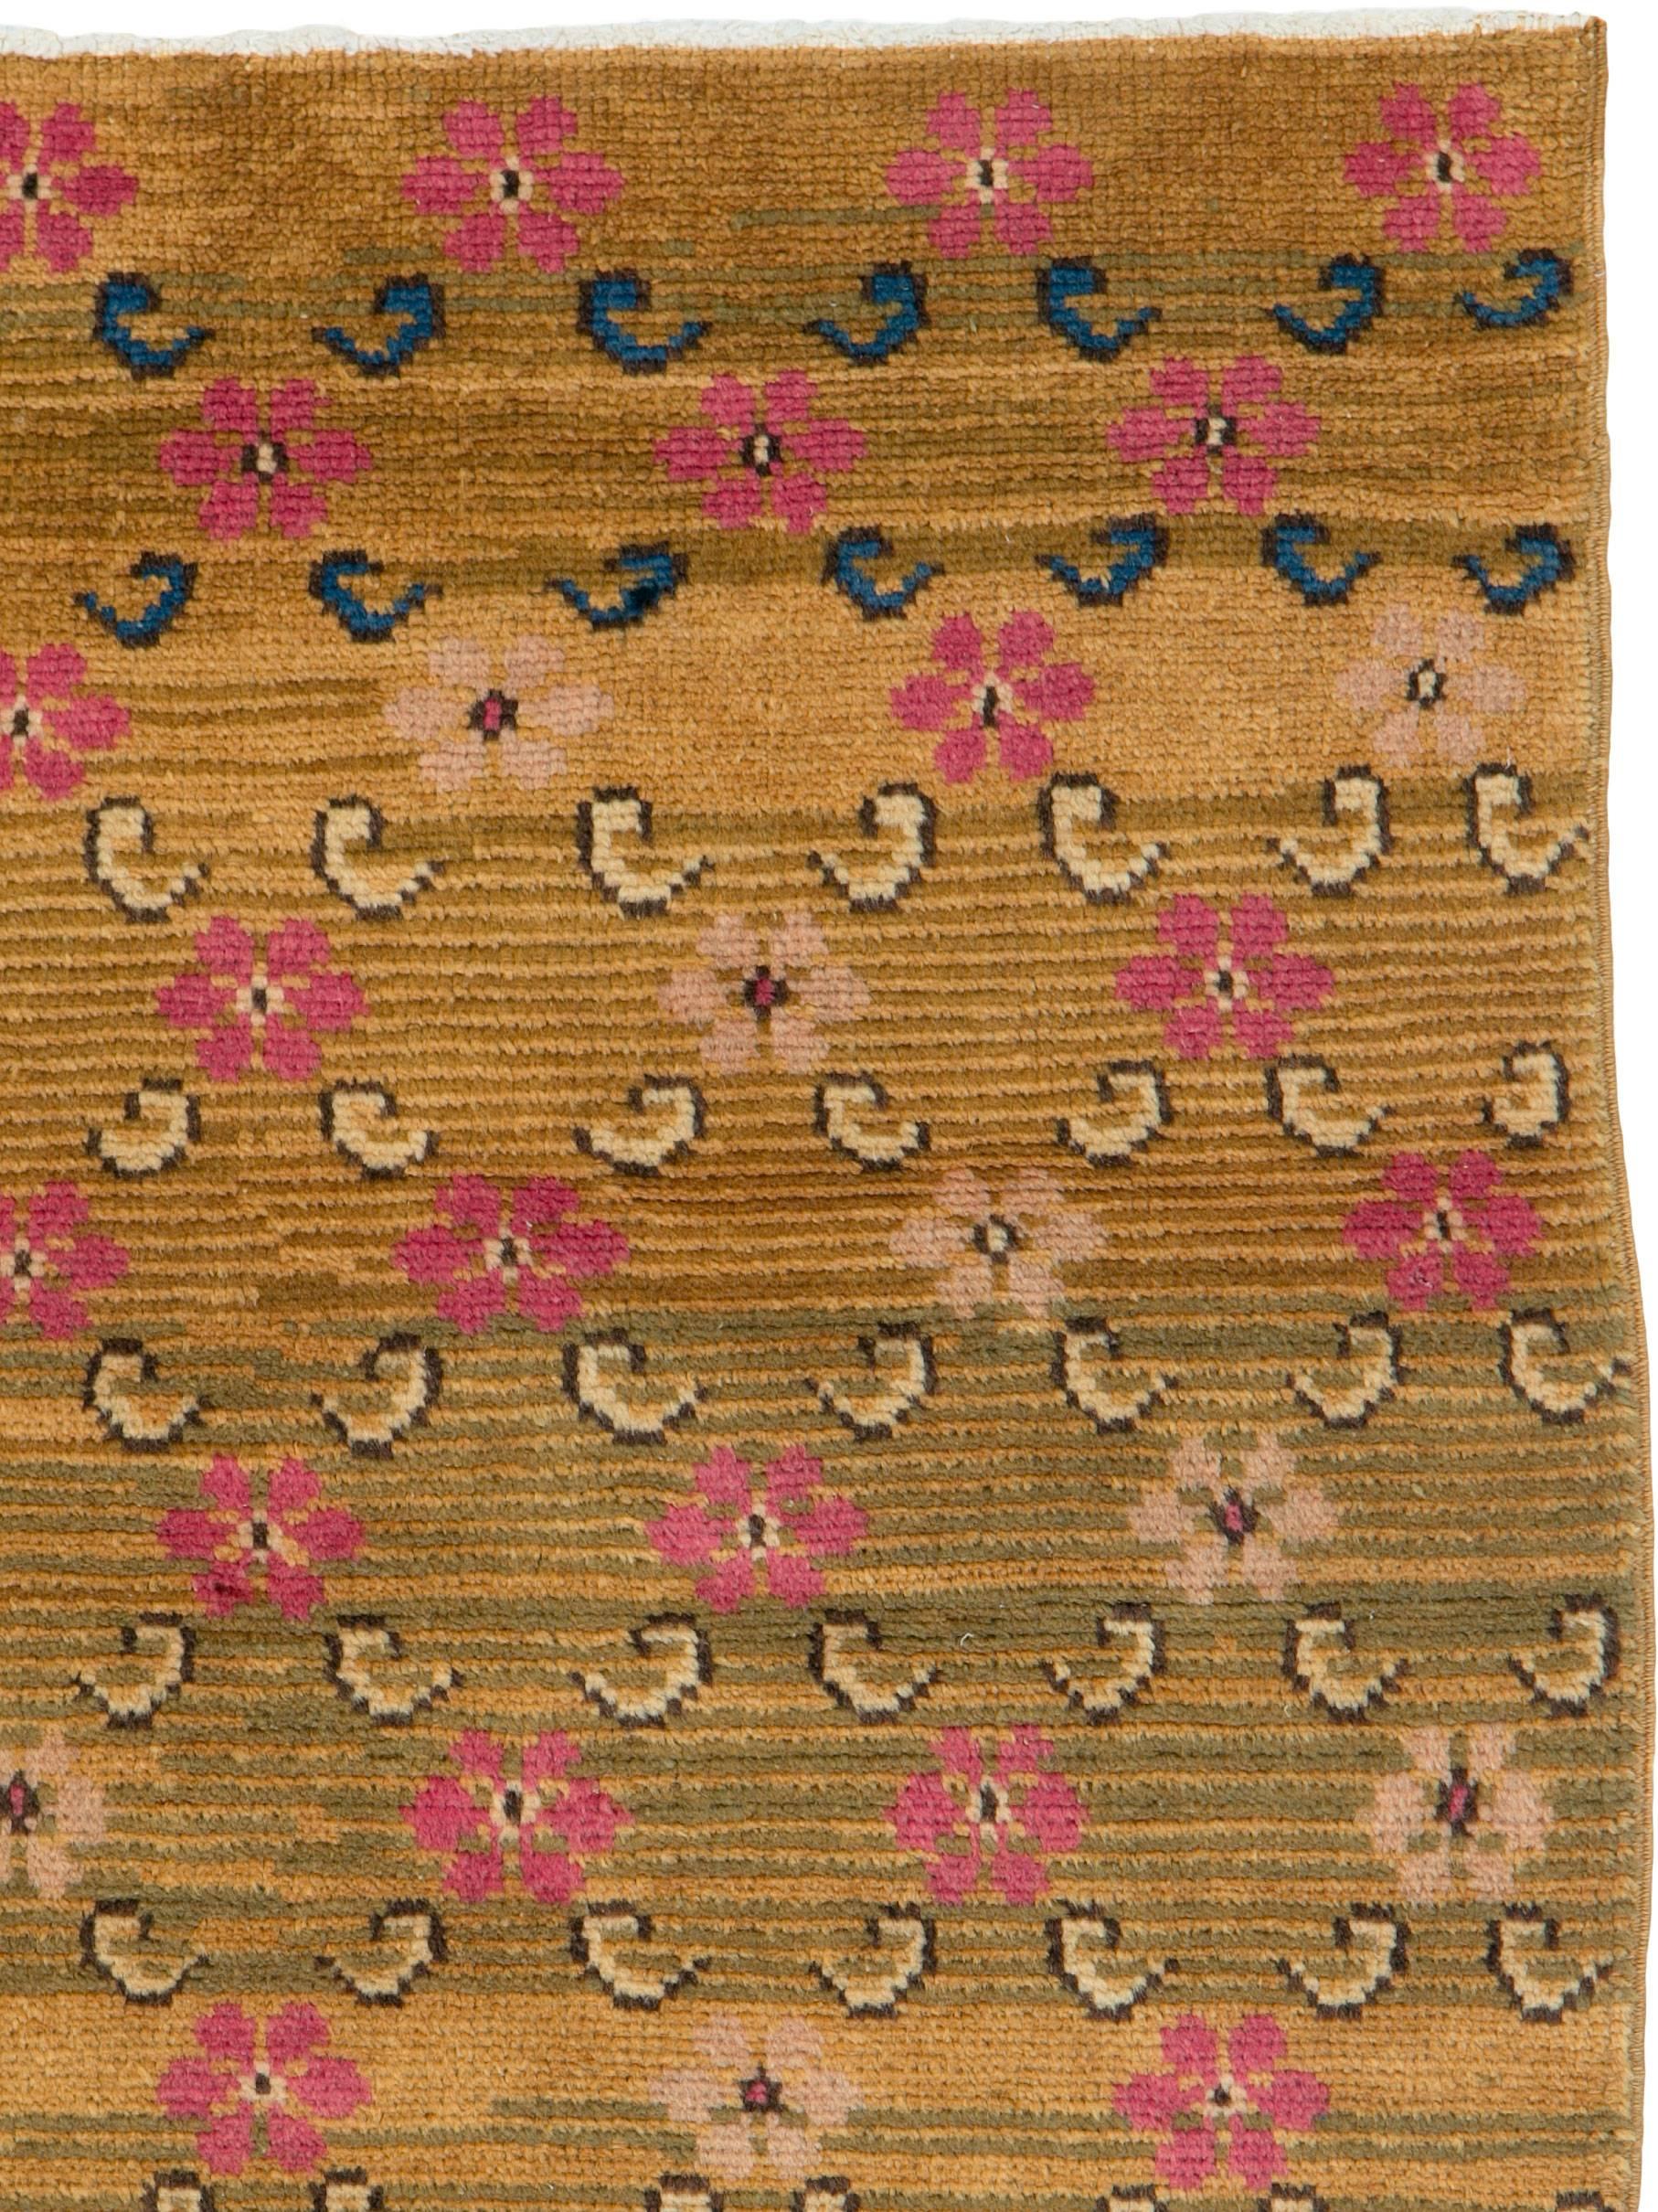 A vintage Turkish Anatolian rug from the mid-20th century.

Measures: 2' 9